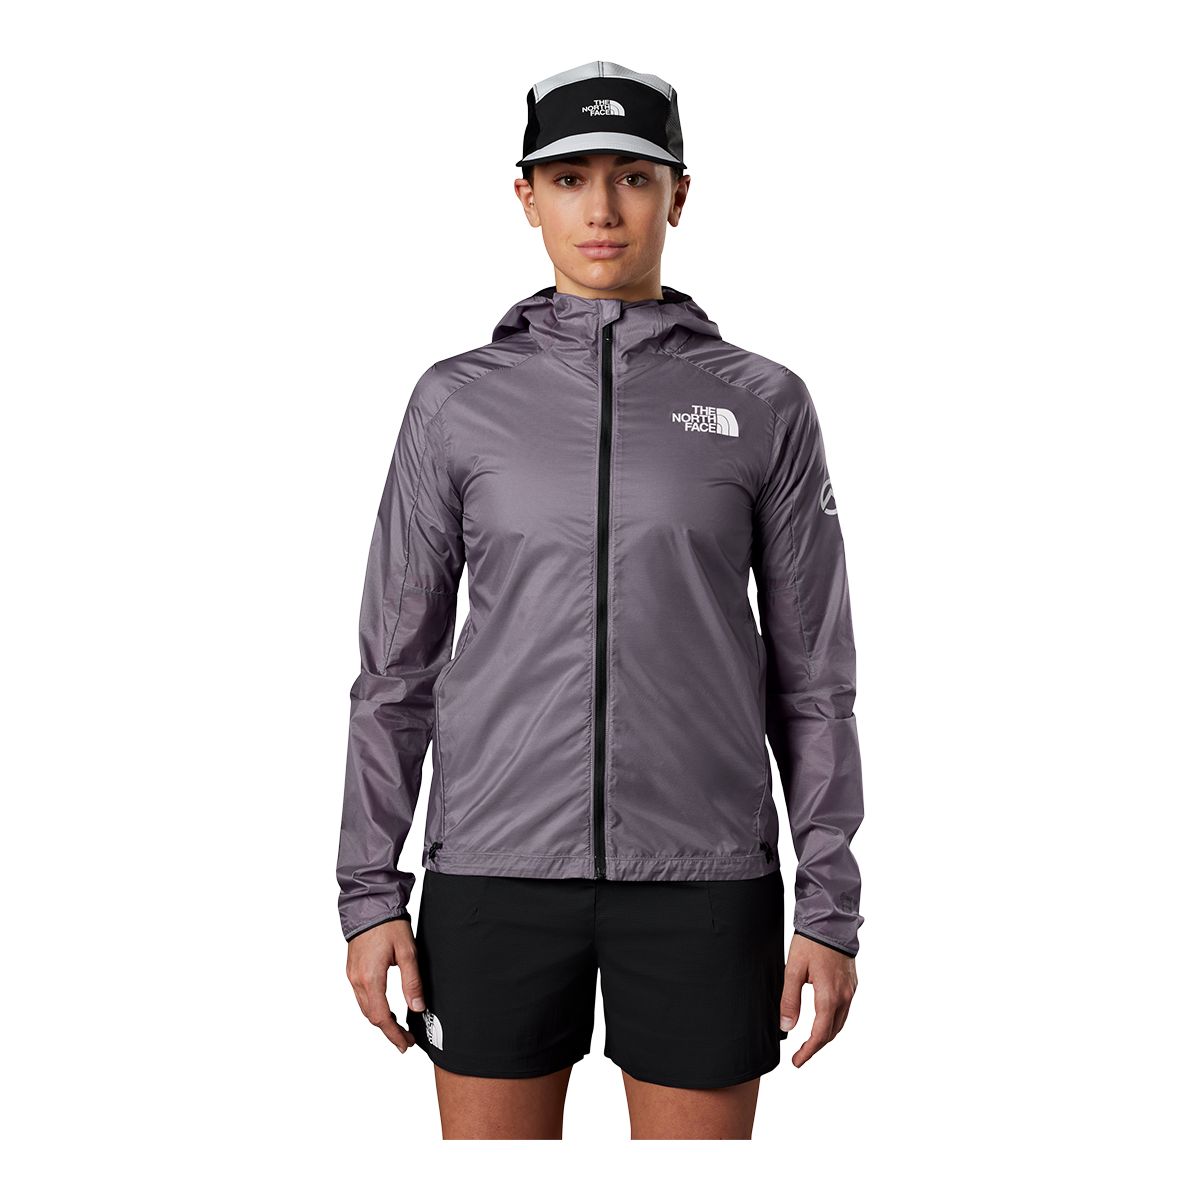 The North Face Women's Summit Superior Wind Jacket